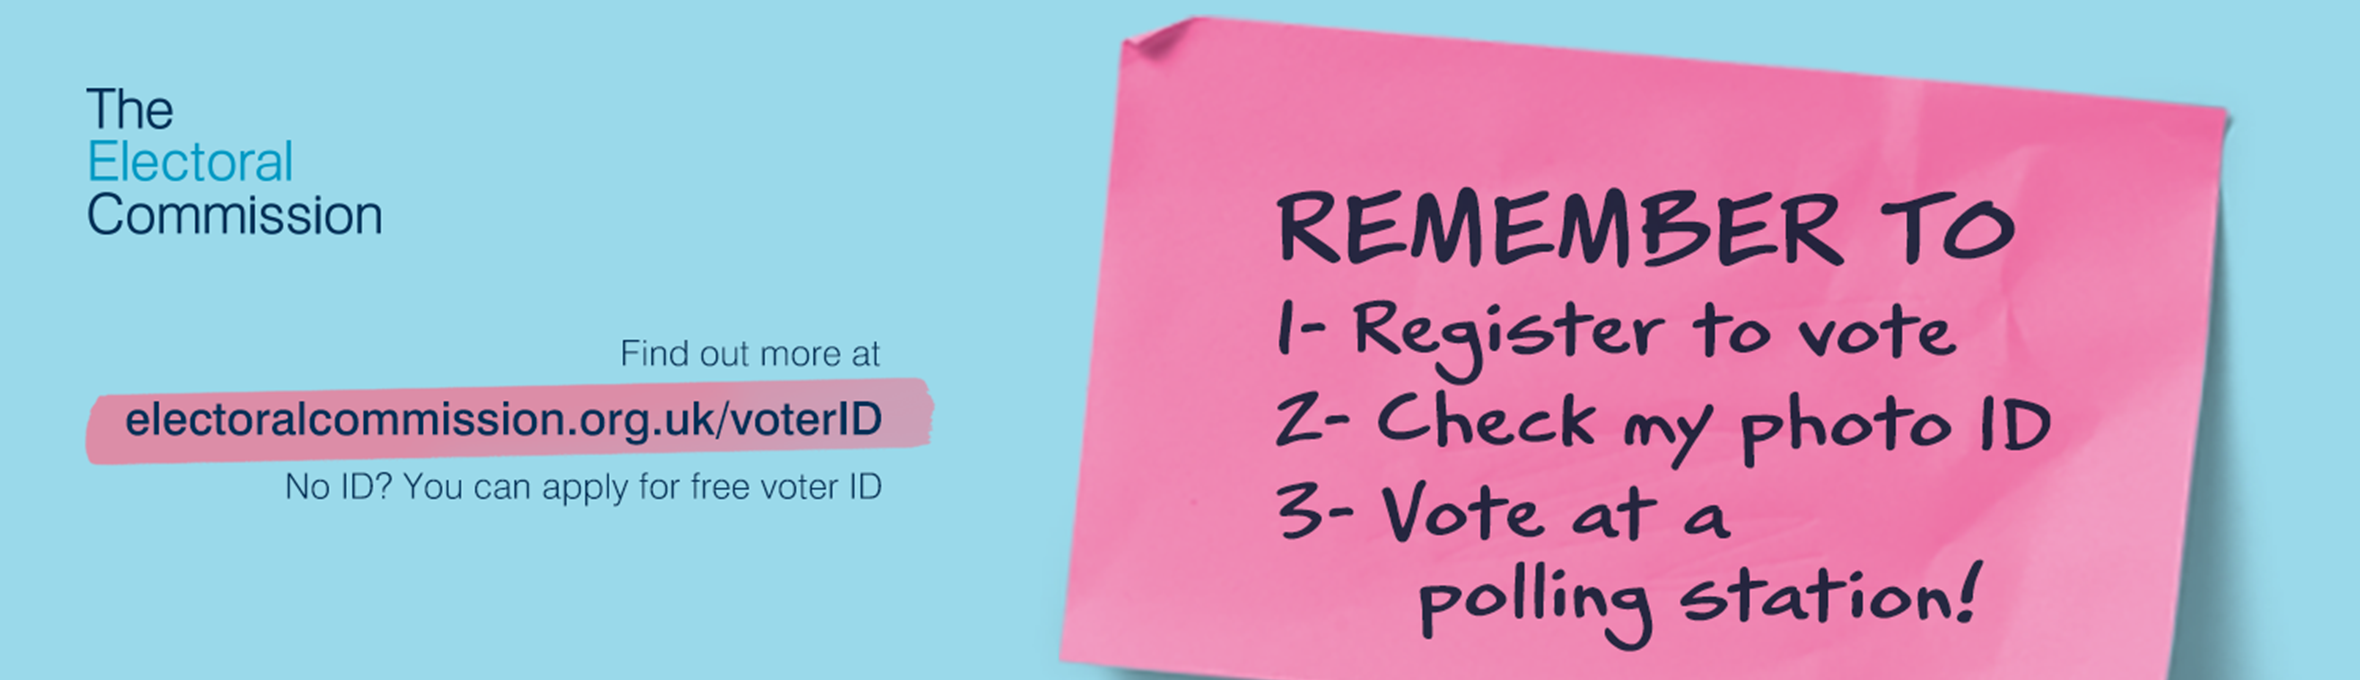 Remember to register to vote, check my Photo ID, Vote at a polling station